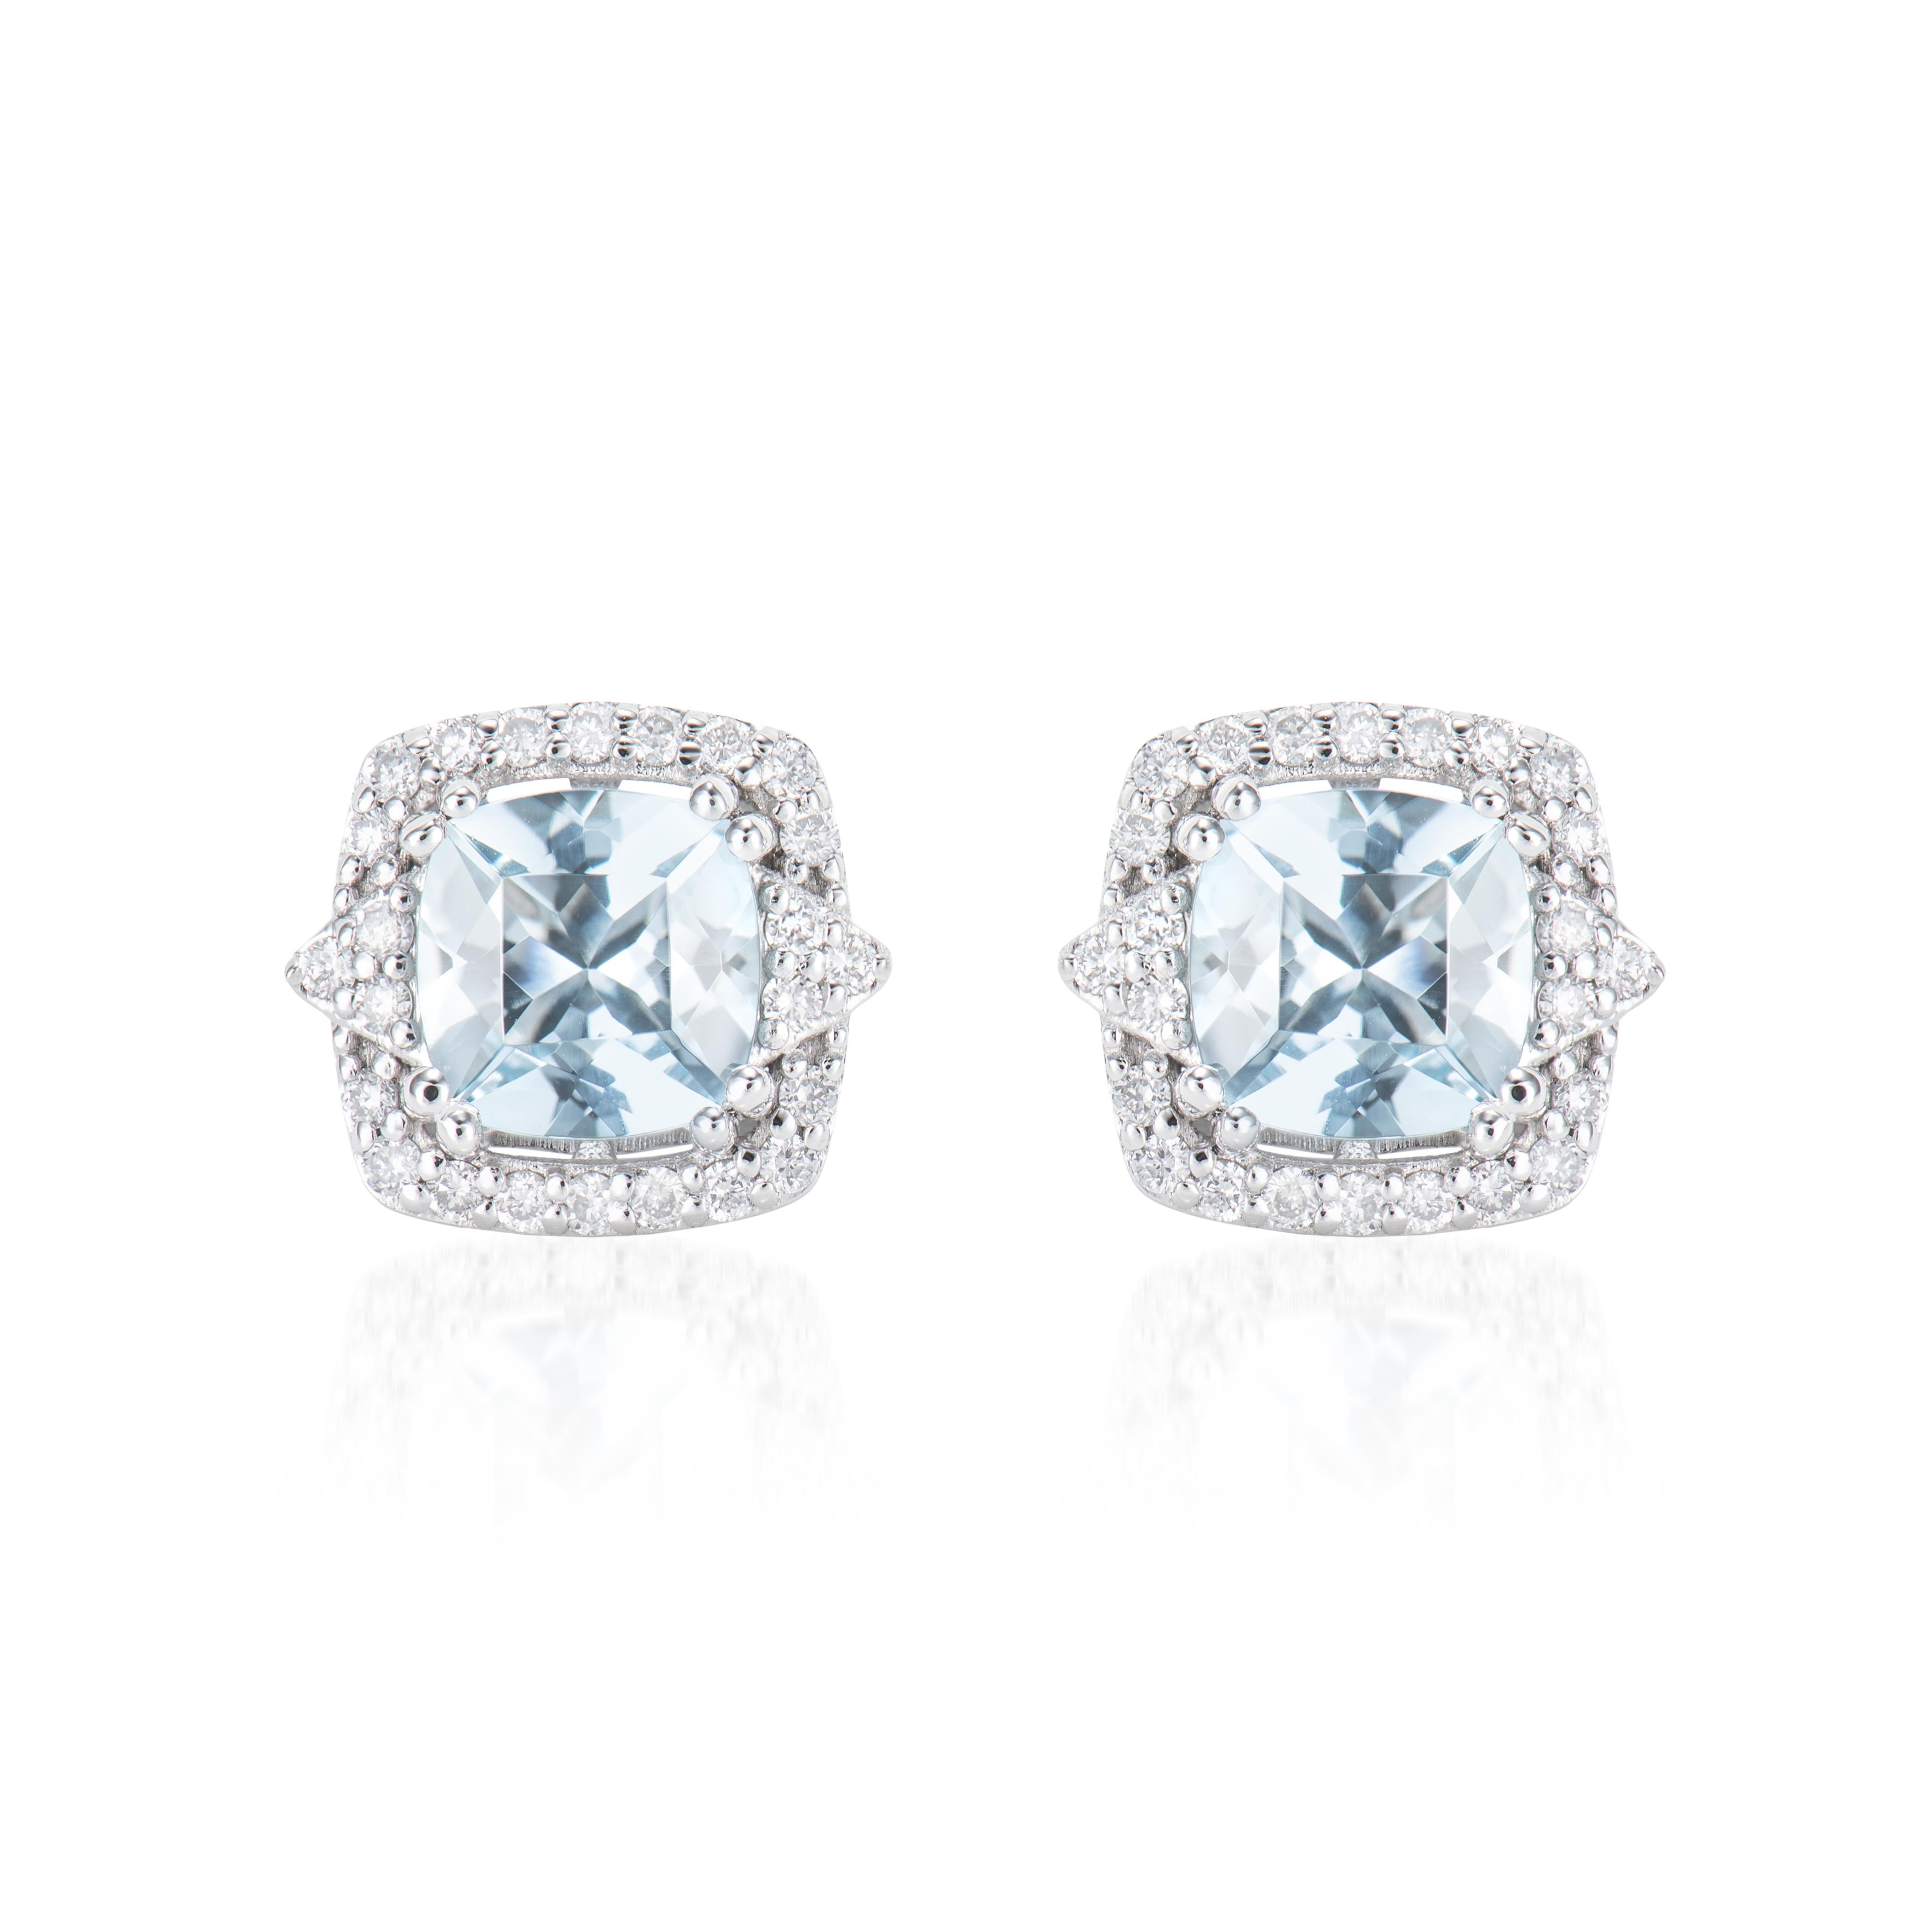 Contemporary 2.44 Carat Aquamarine Stud Earrings in 18 Karat White Gold with White Diamond For Sale